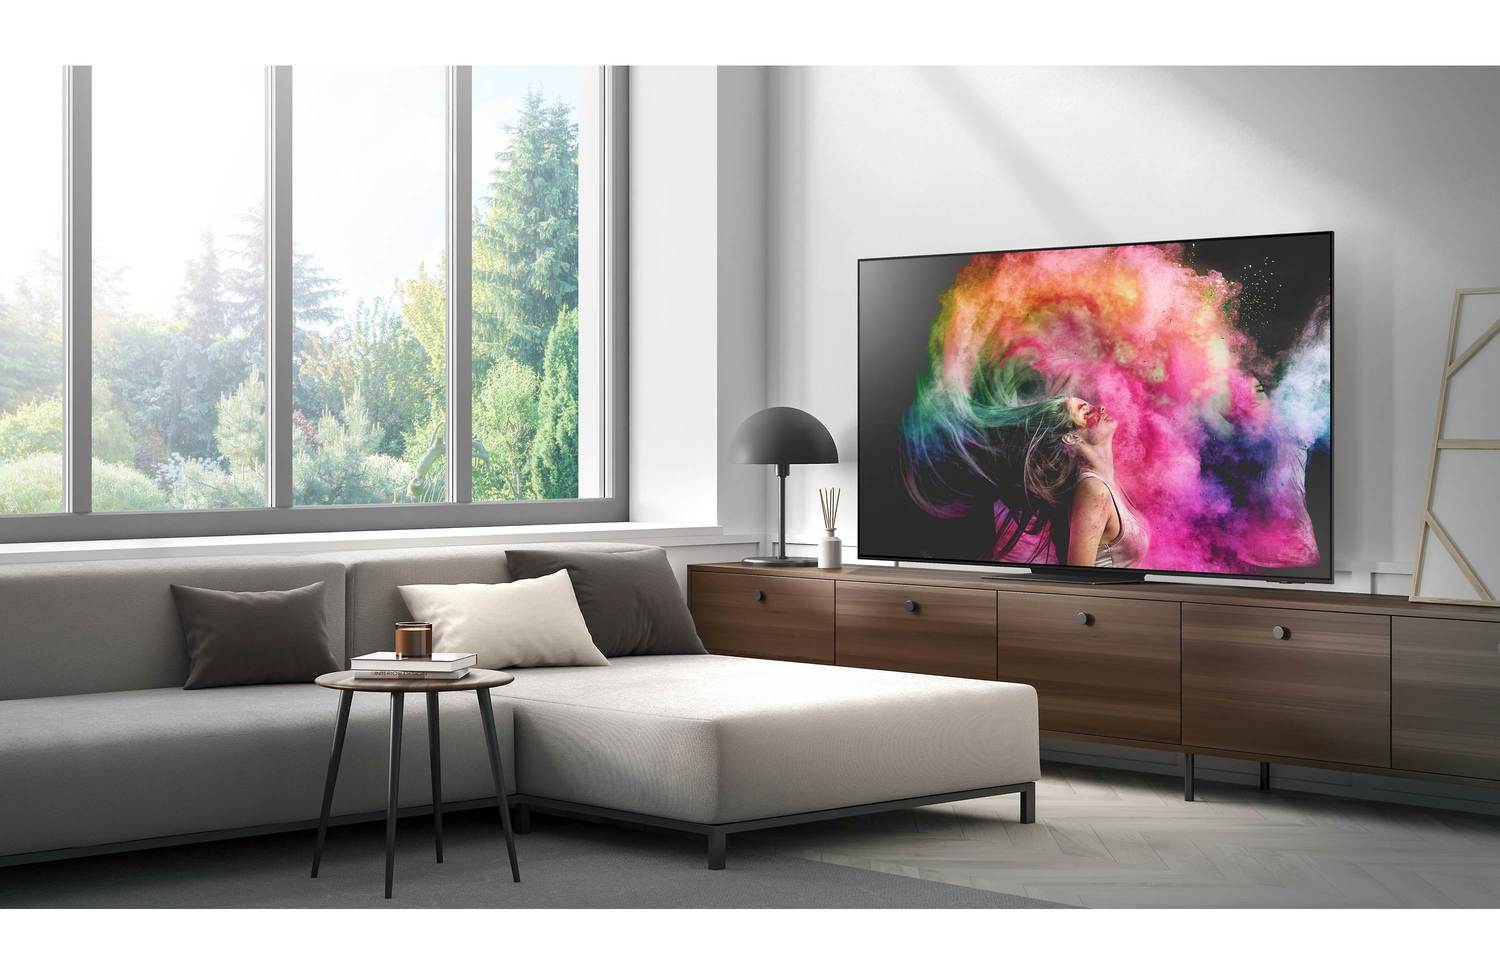 Samsung S95C OLED room view c | HDTVs and More